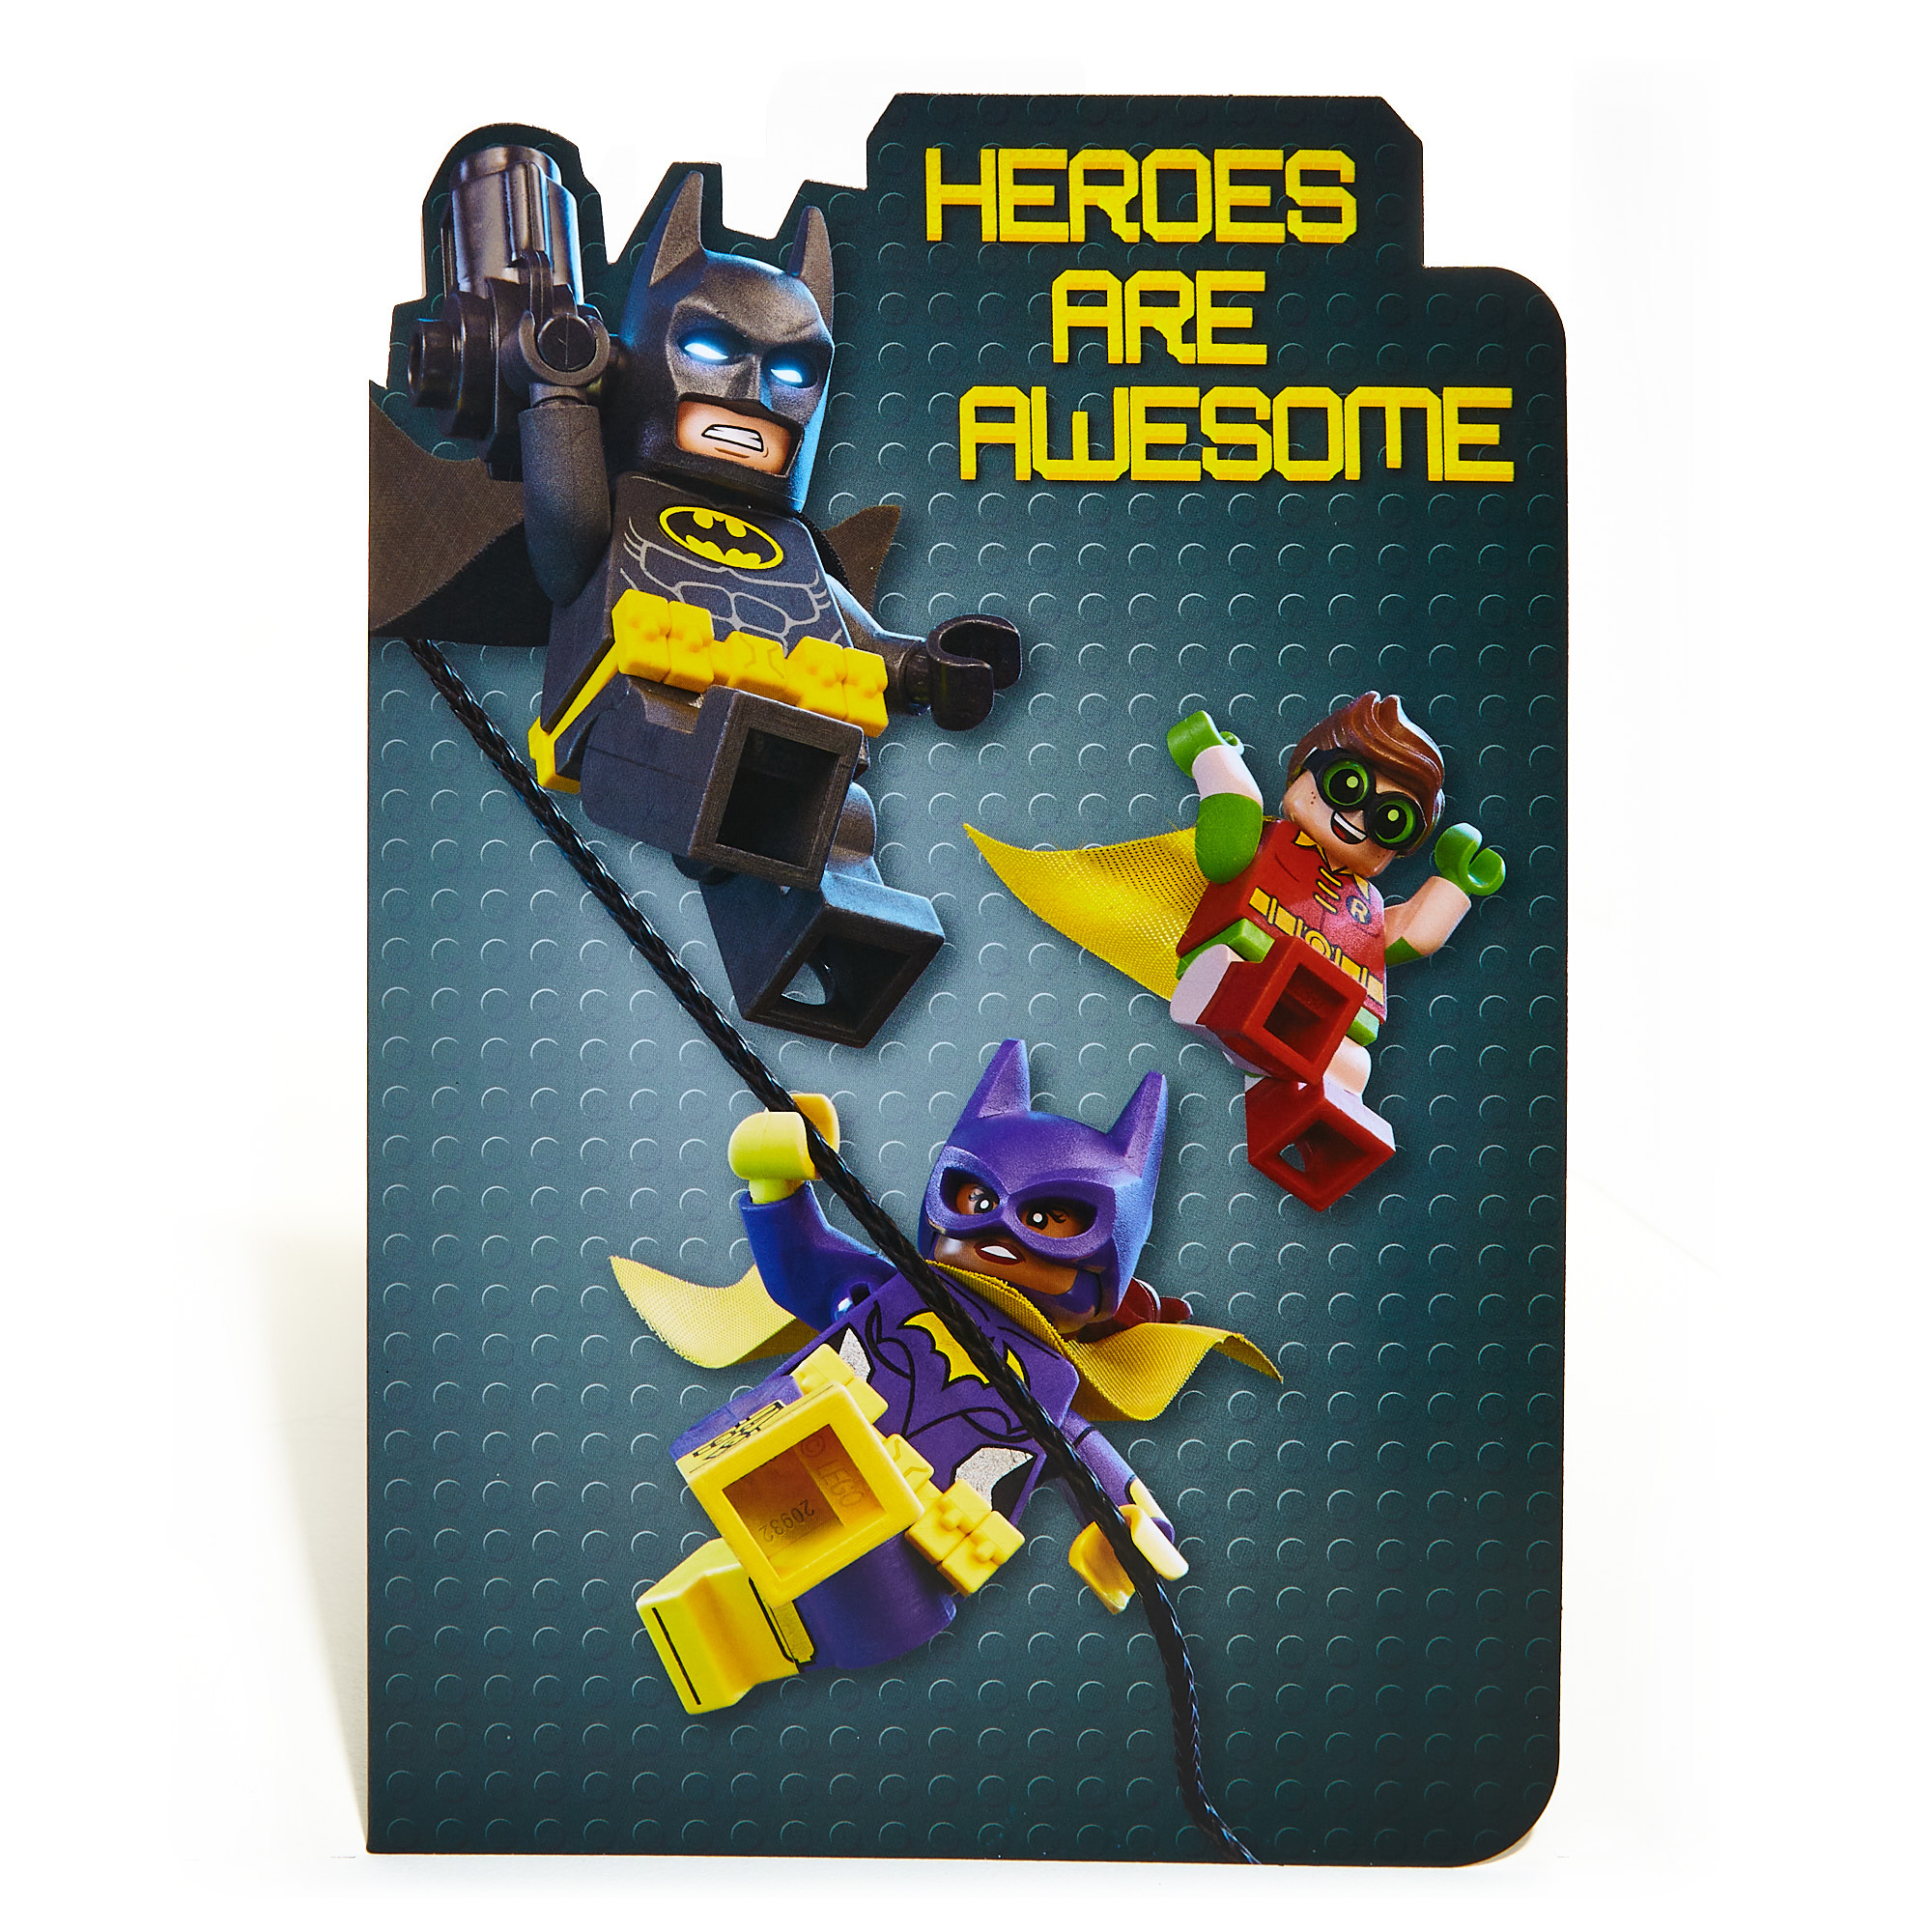 Lego Batman Birthday Card - Heroes Are Awesome